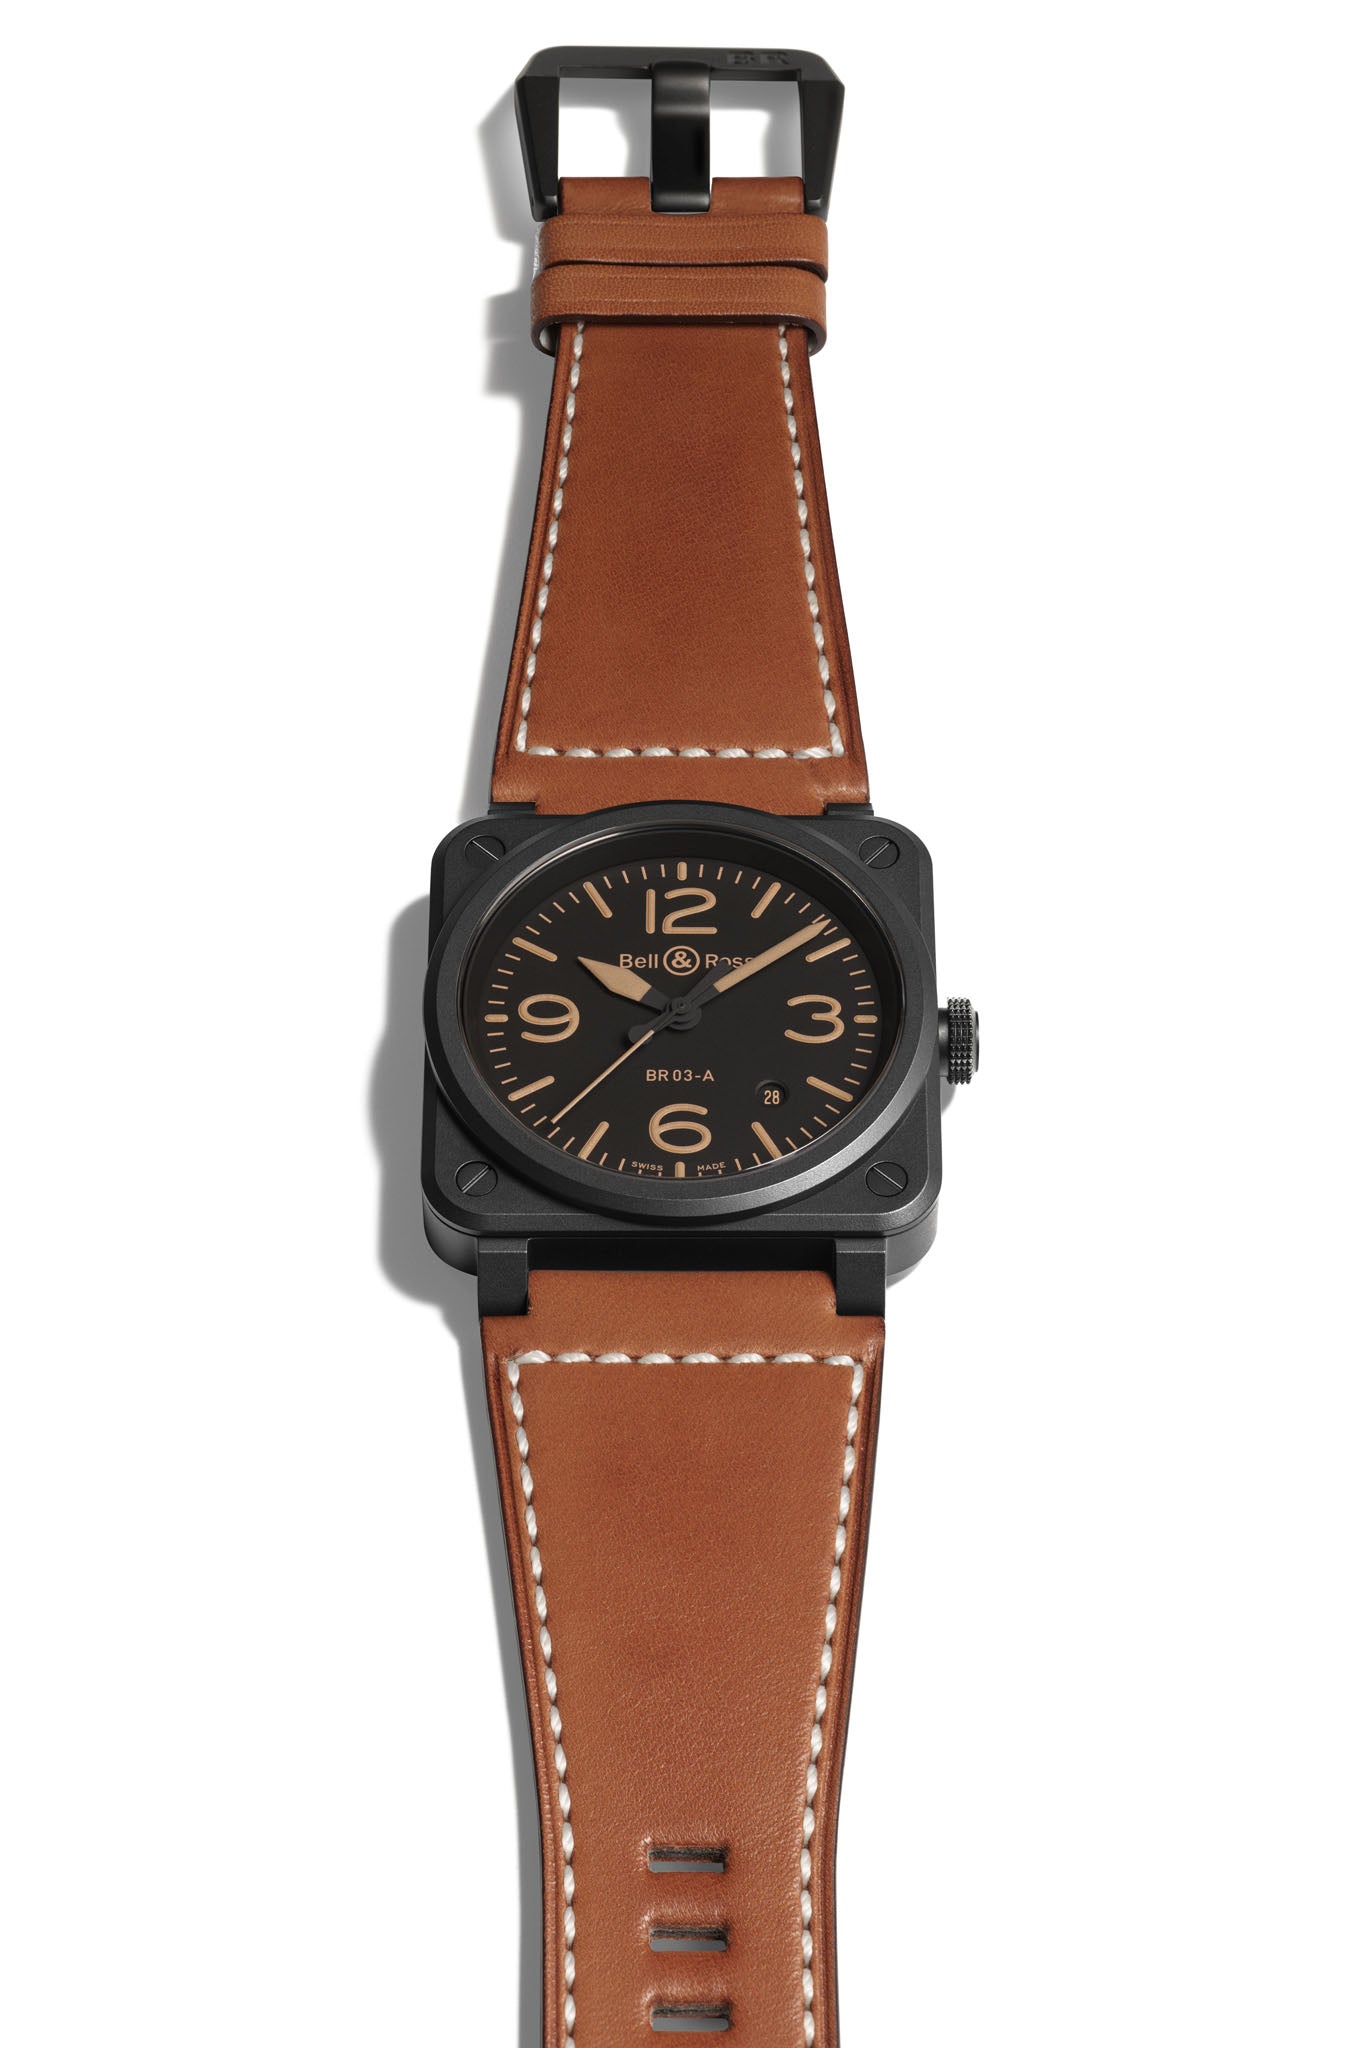 Bell & Ross BR 03-A Heritage rannekello